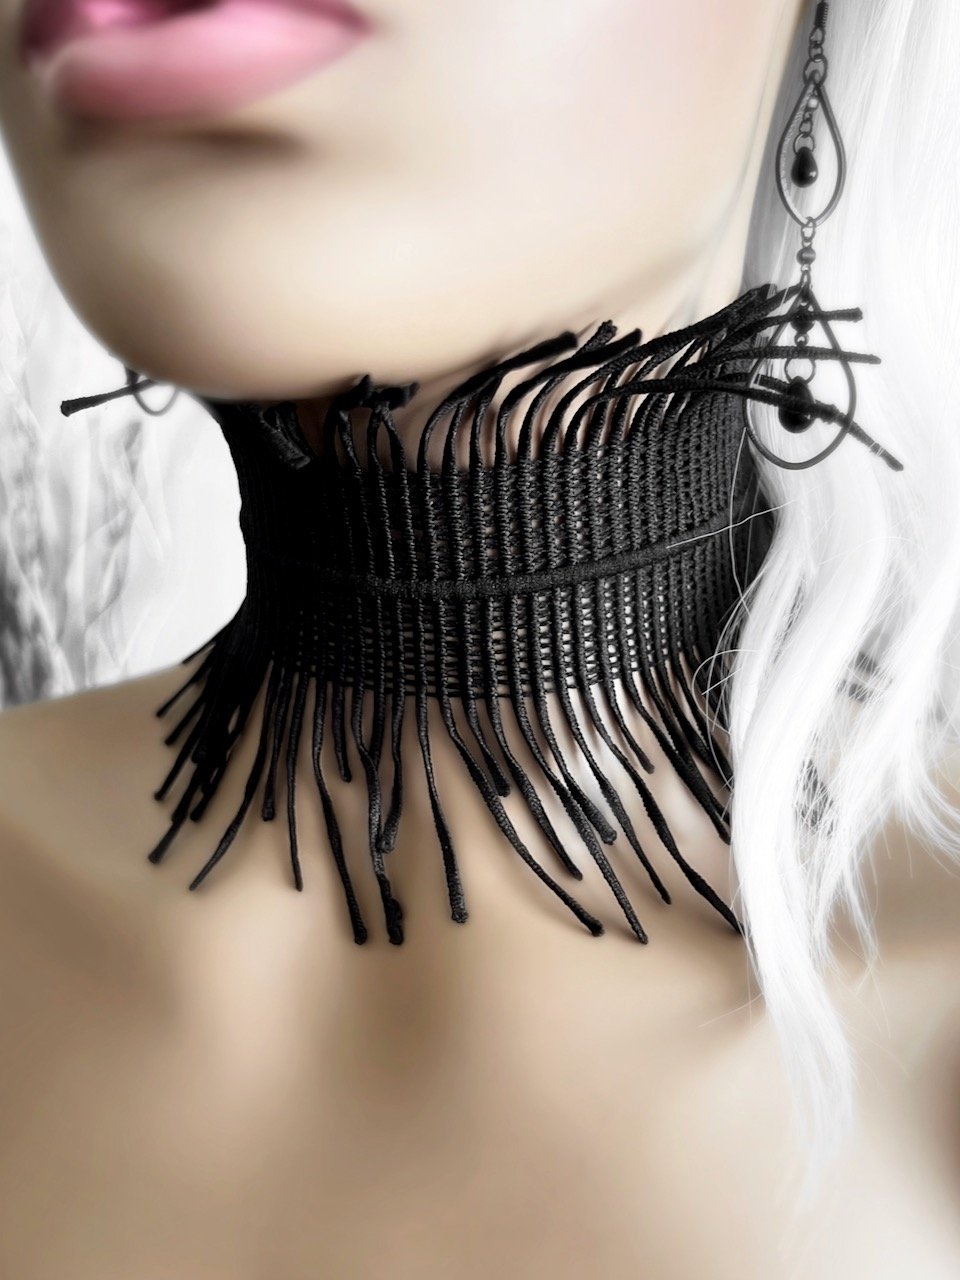 Newest Style Gothic Victorian Crystal Tassel Tattoo Choker Necklace Black  Lace Choker Collar Vintage Women Wedding Jewelry TvFS# From Walmarts,  $26.51 | DHgate.Com